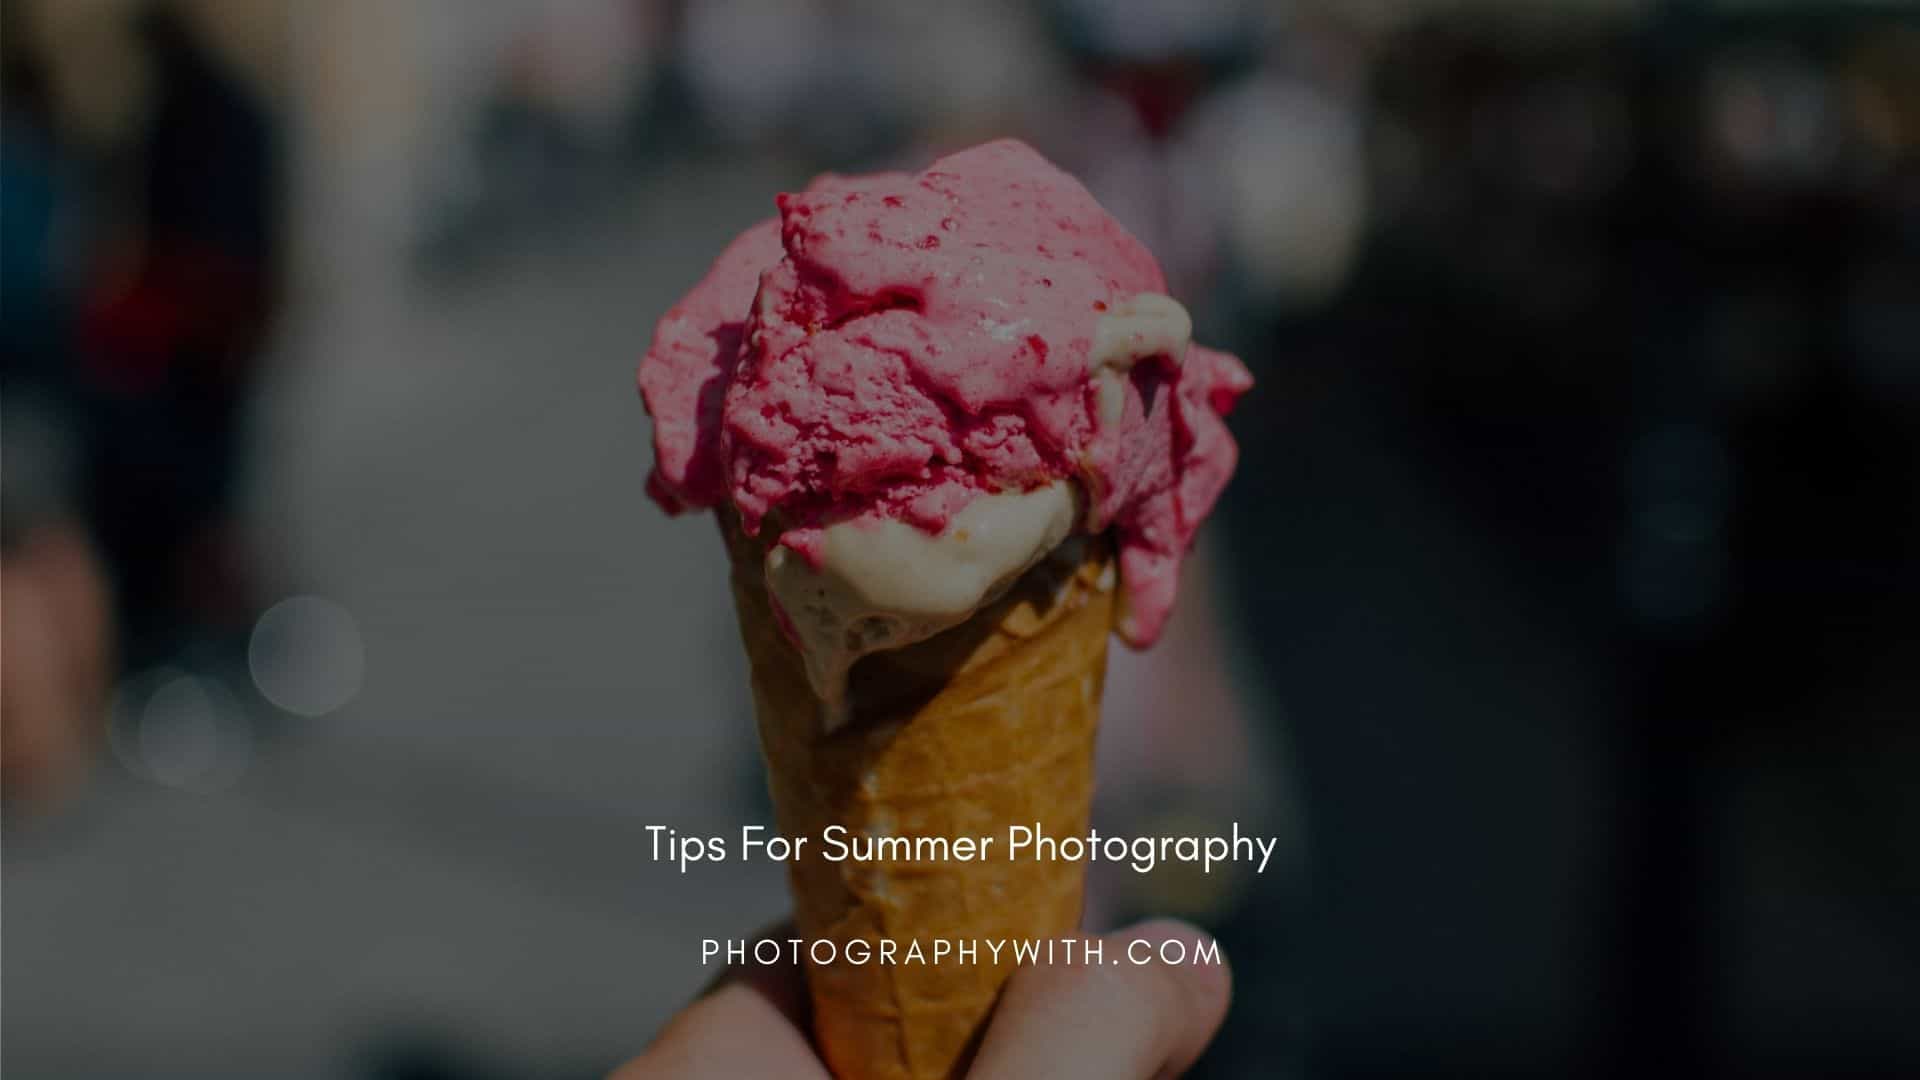 Tips For Summer Photography